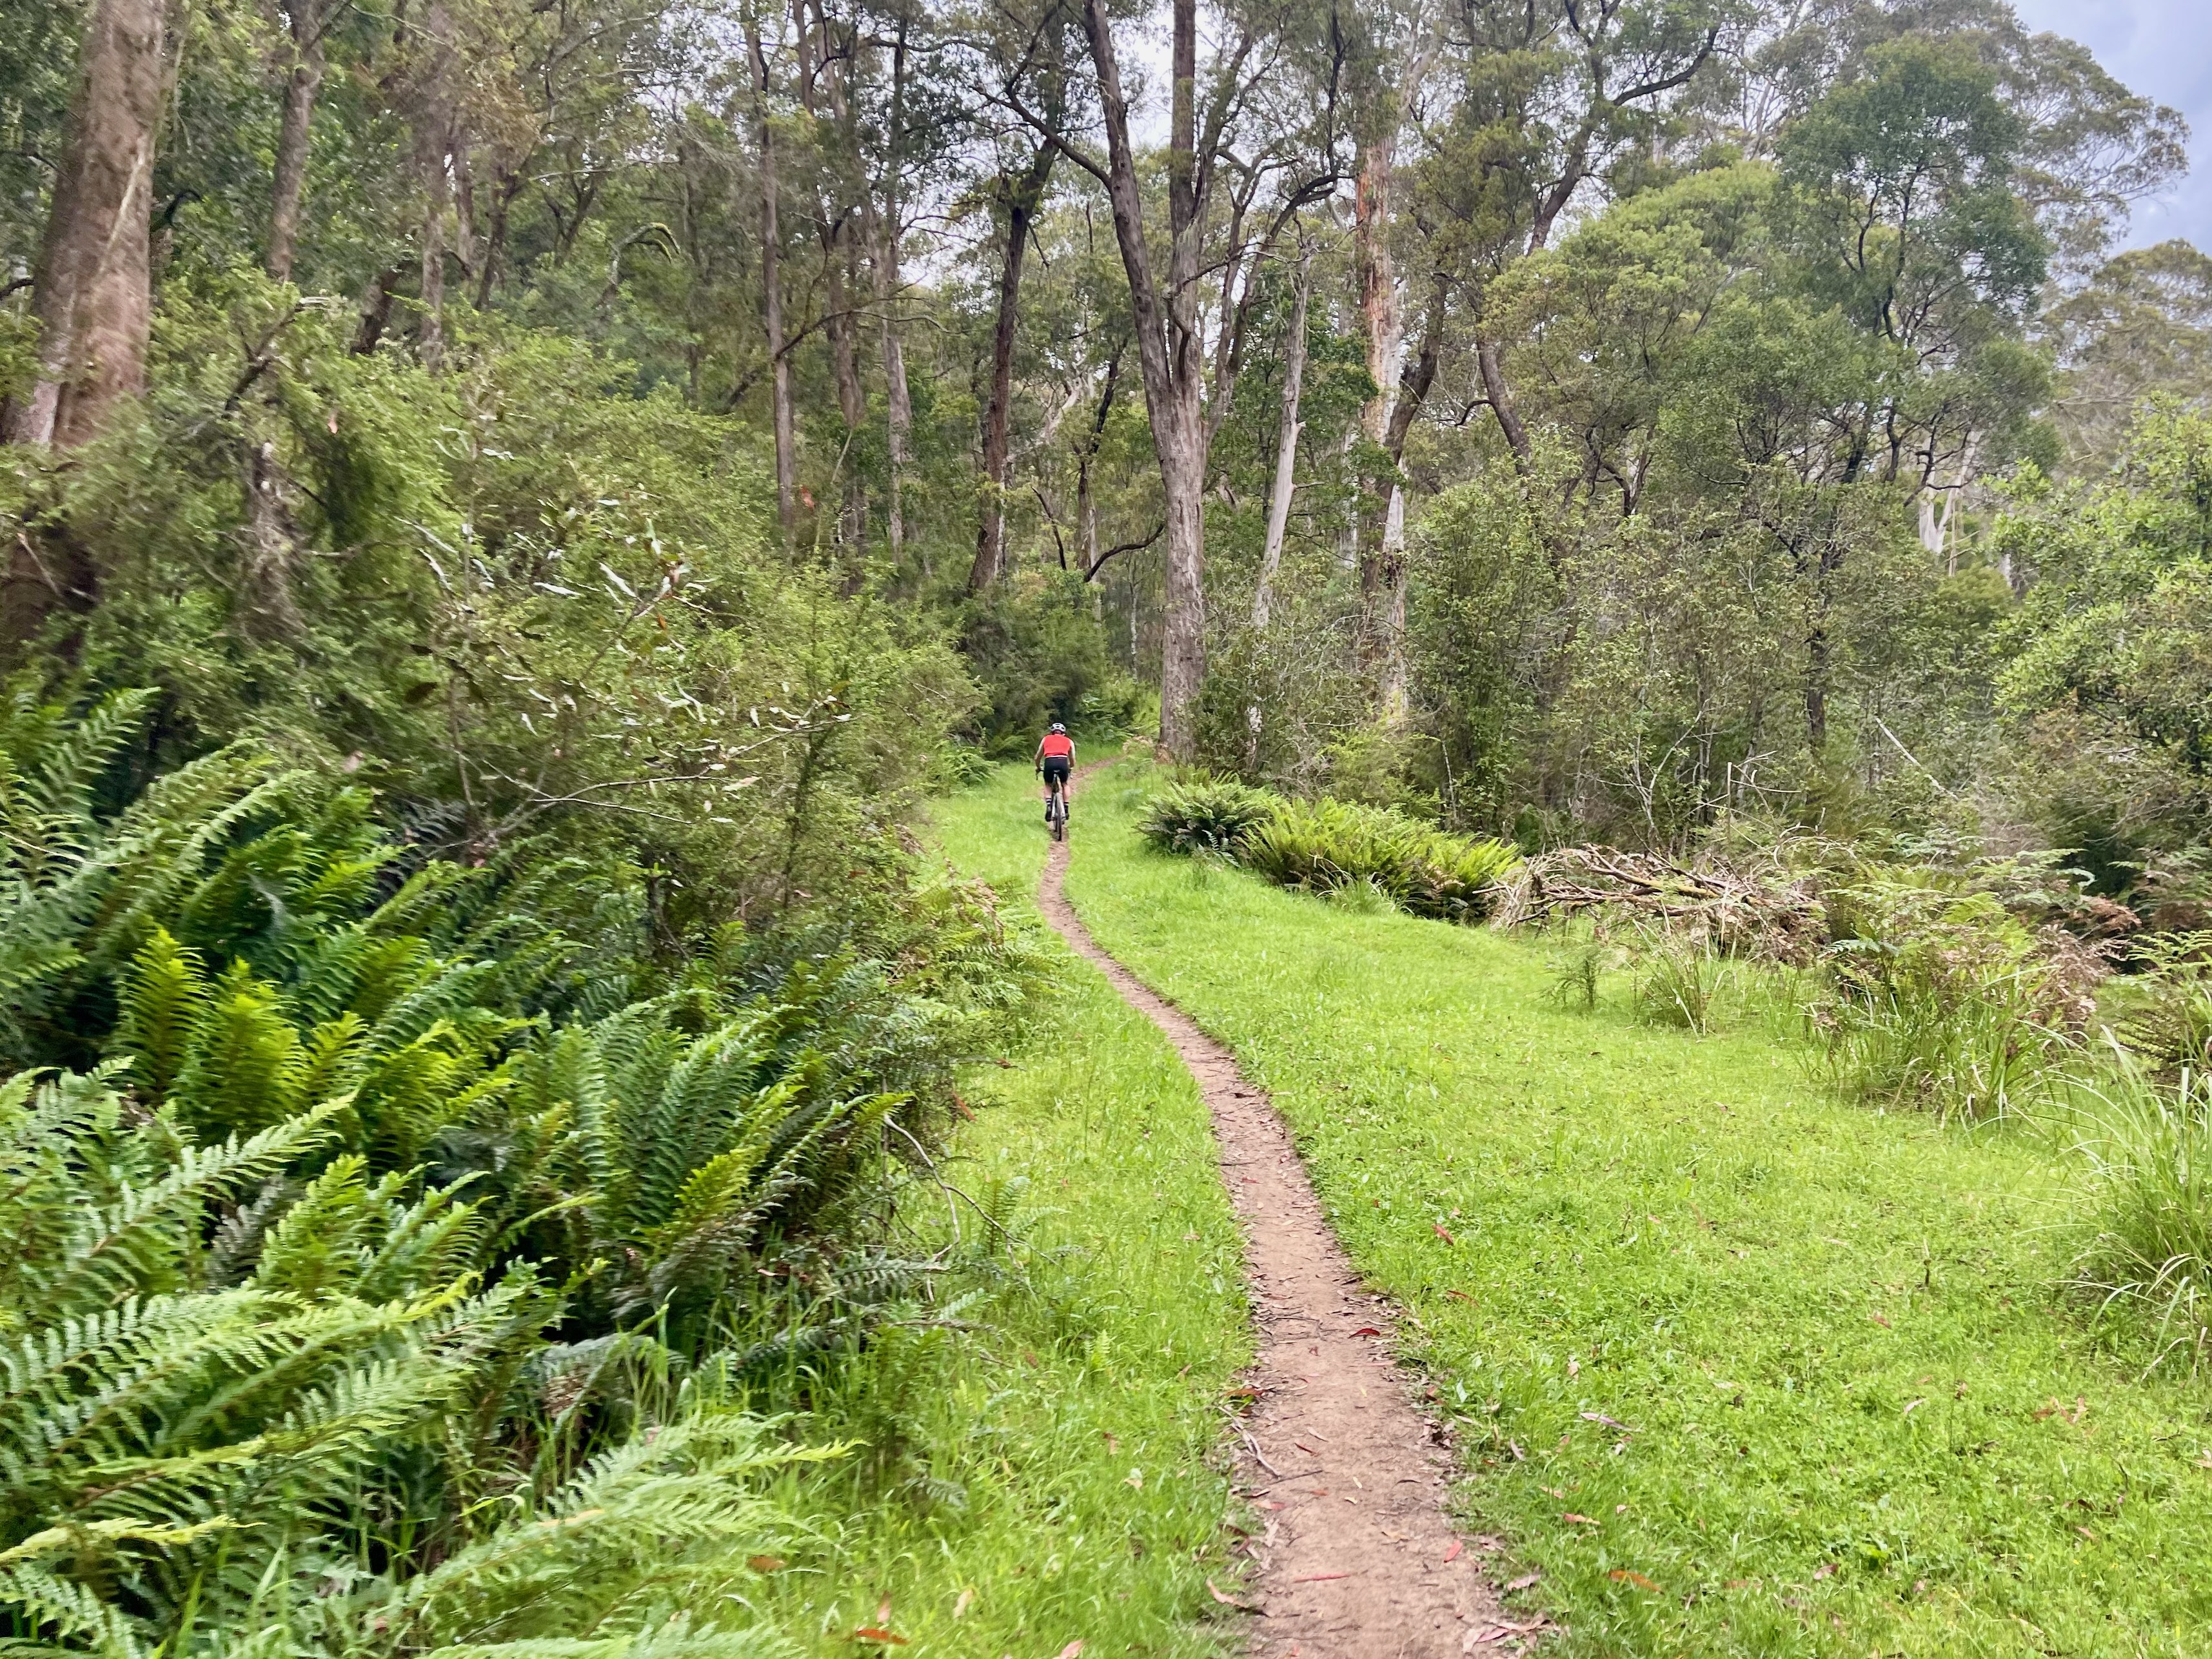 Cyclist riding a narrow track between area of lush green grass while being surrounded by native bushland